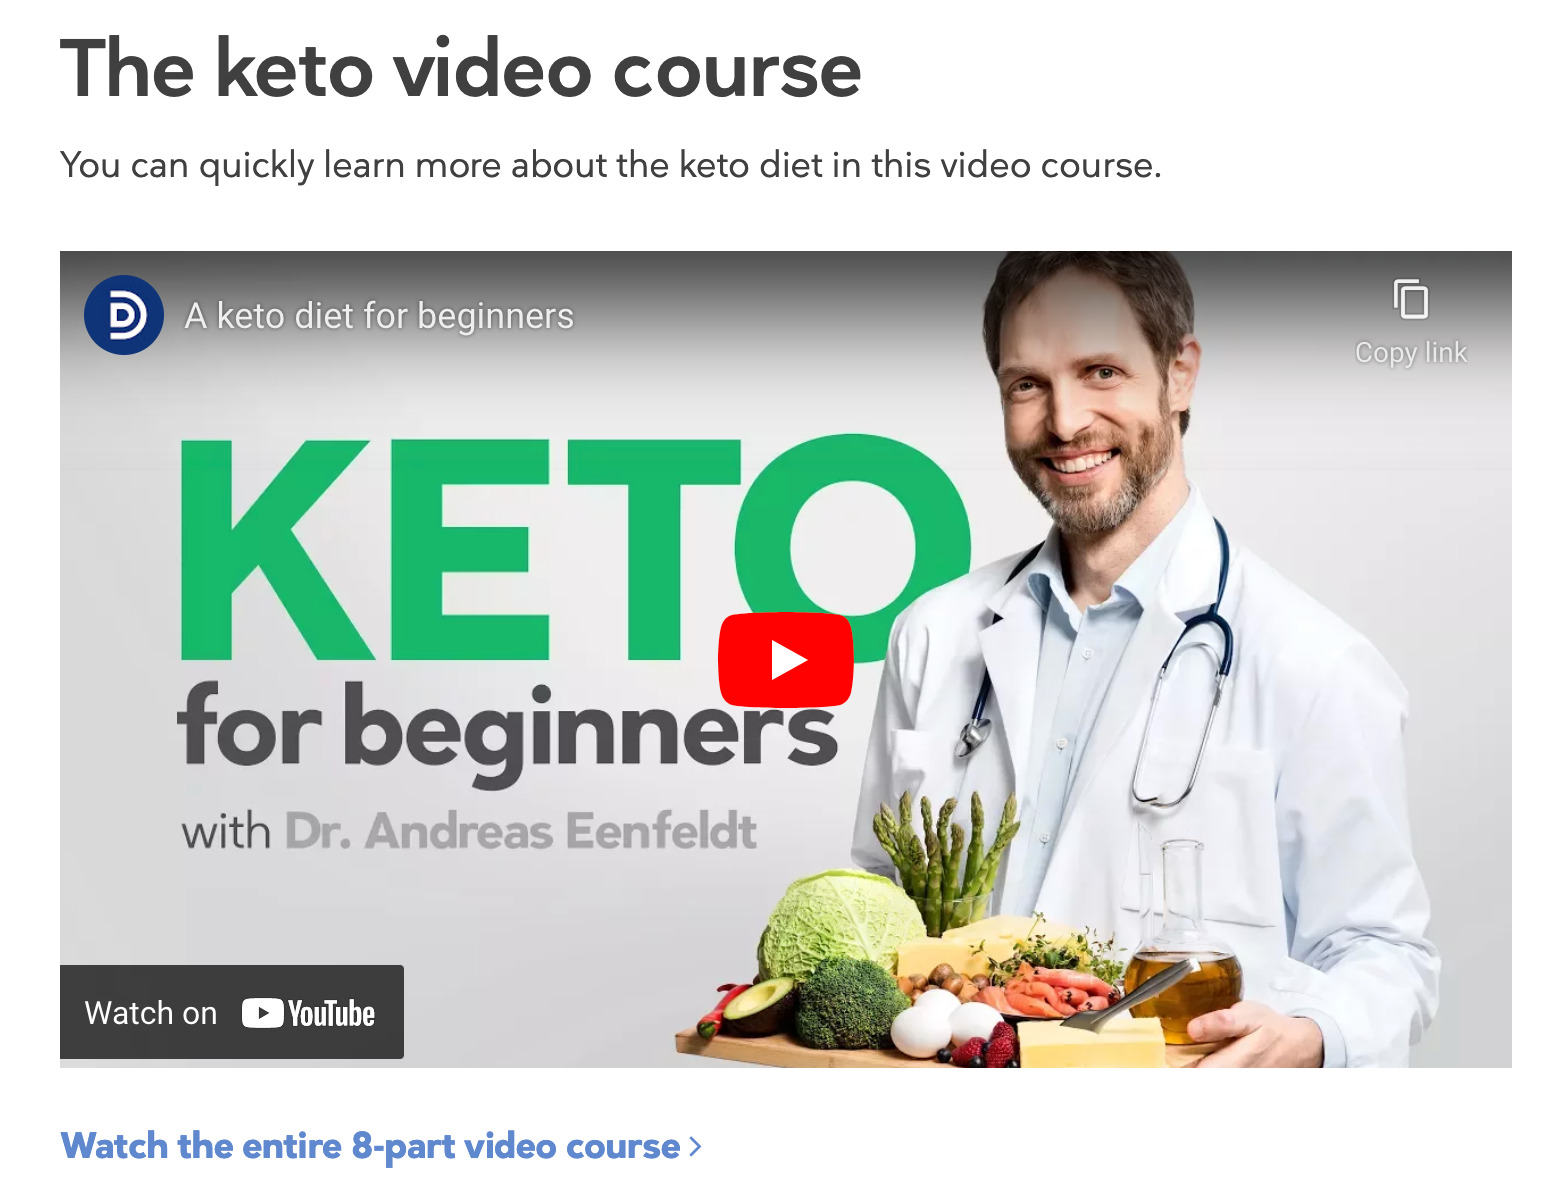 Video course about keto diet for beginners